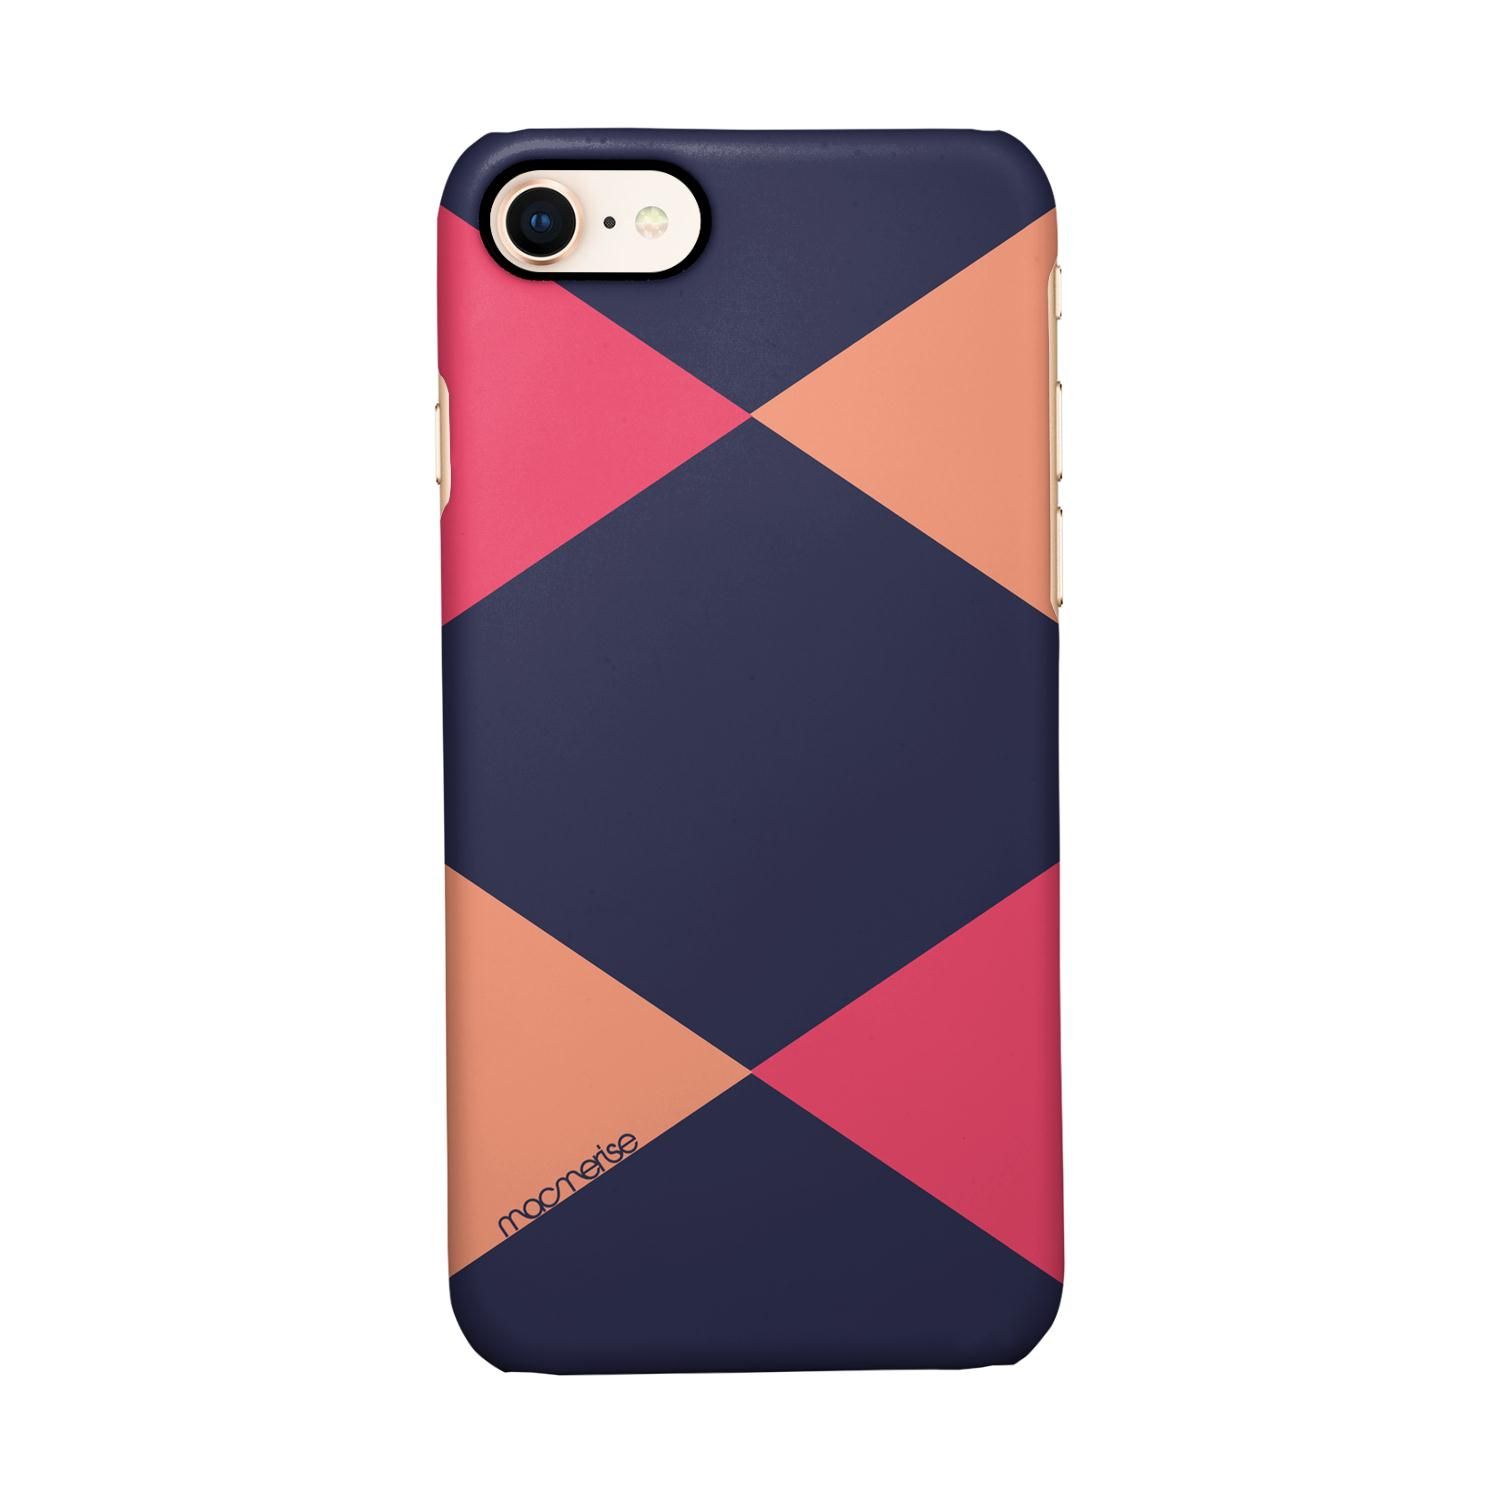 Buy Criss Cross Blupink - Sleek Phone Case for iPhone 8 Online